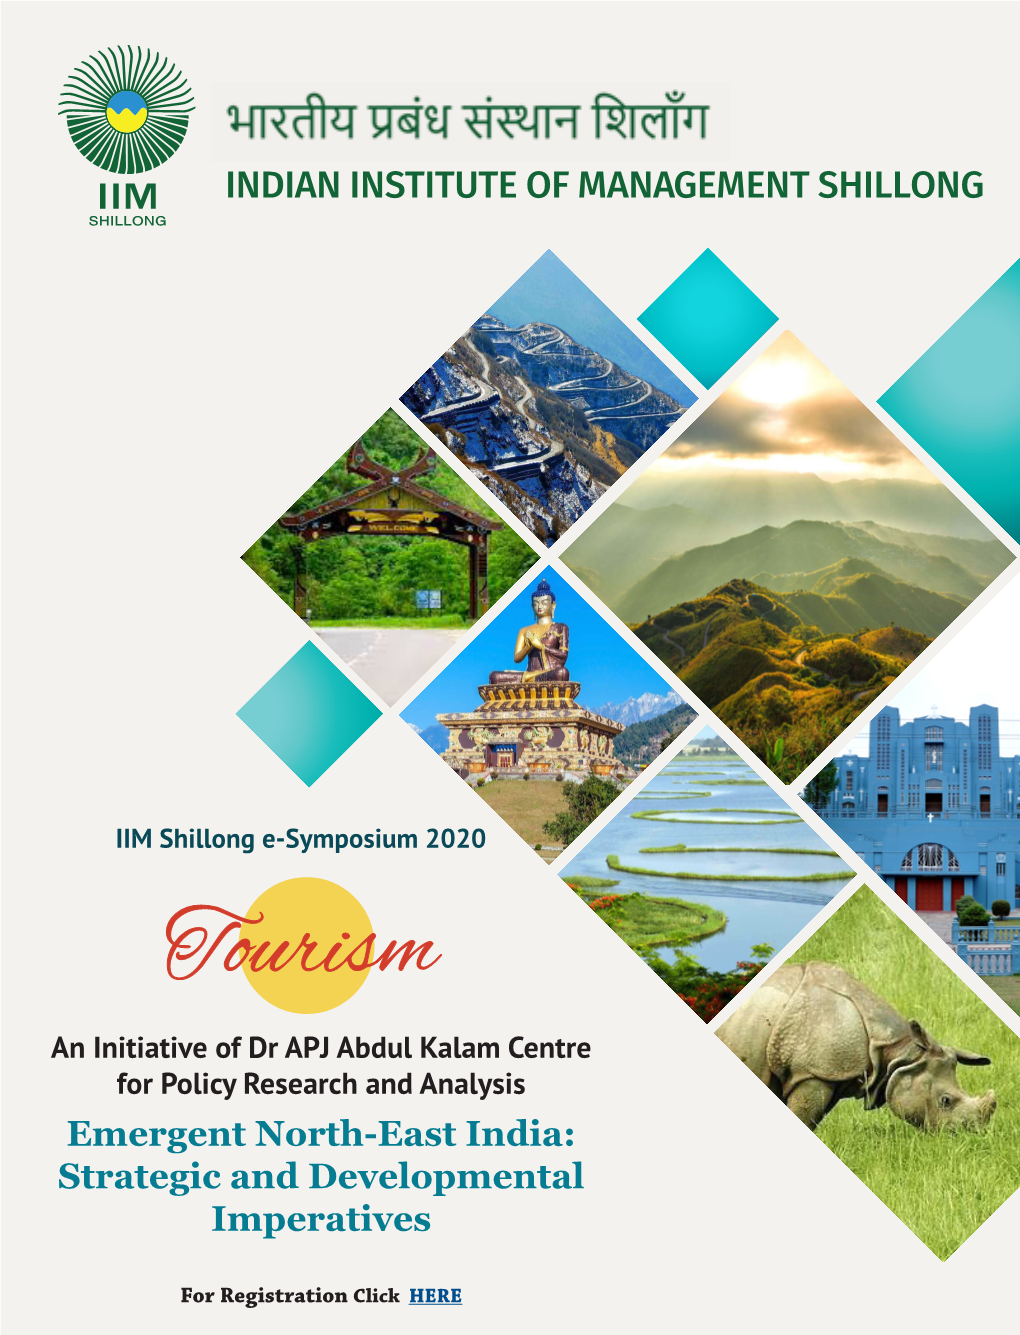 Tourism an Initiative of Dr APJ Abdul Kalam Centre for Policy Research and Analysis Emergent North-East India: Strategic and Developmental Imperatives